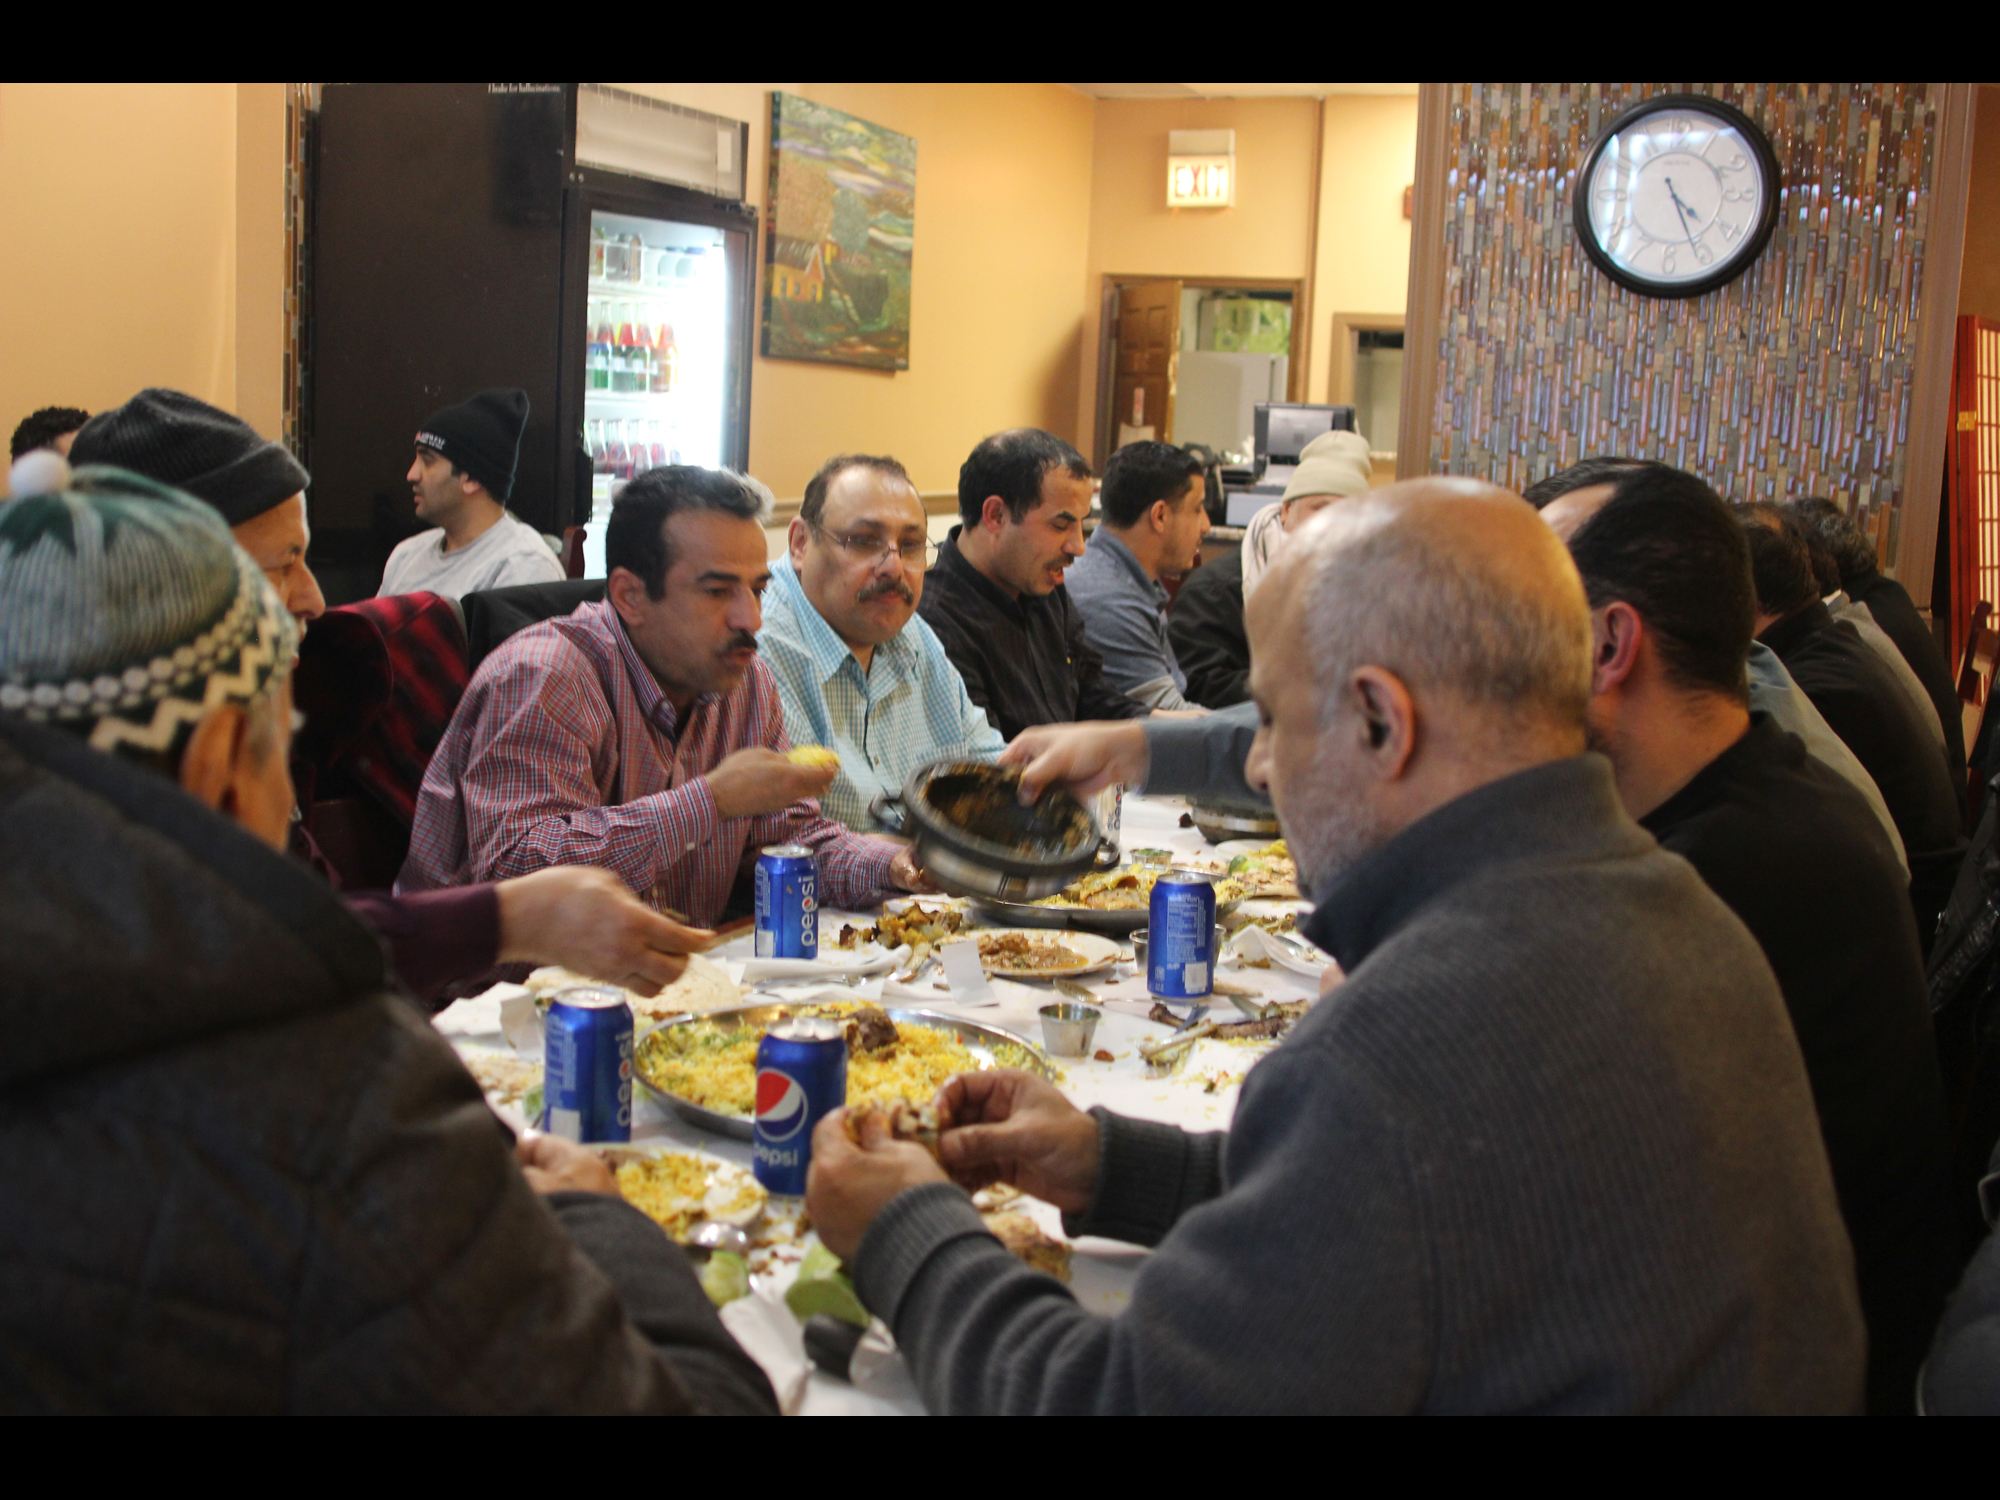 A YEMENI WELCOME AT MANDI NOOR ON LAWRENCE